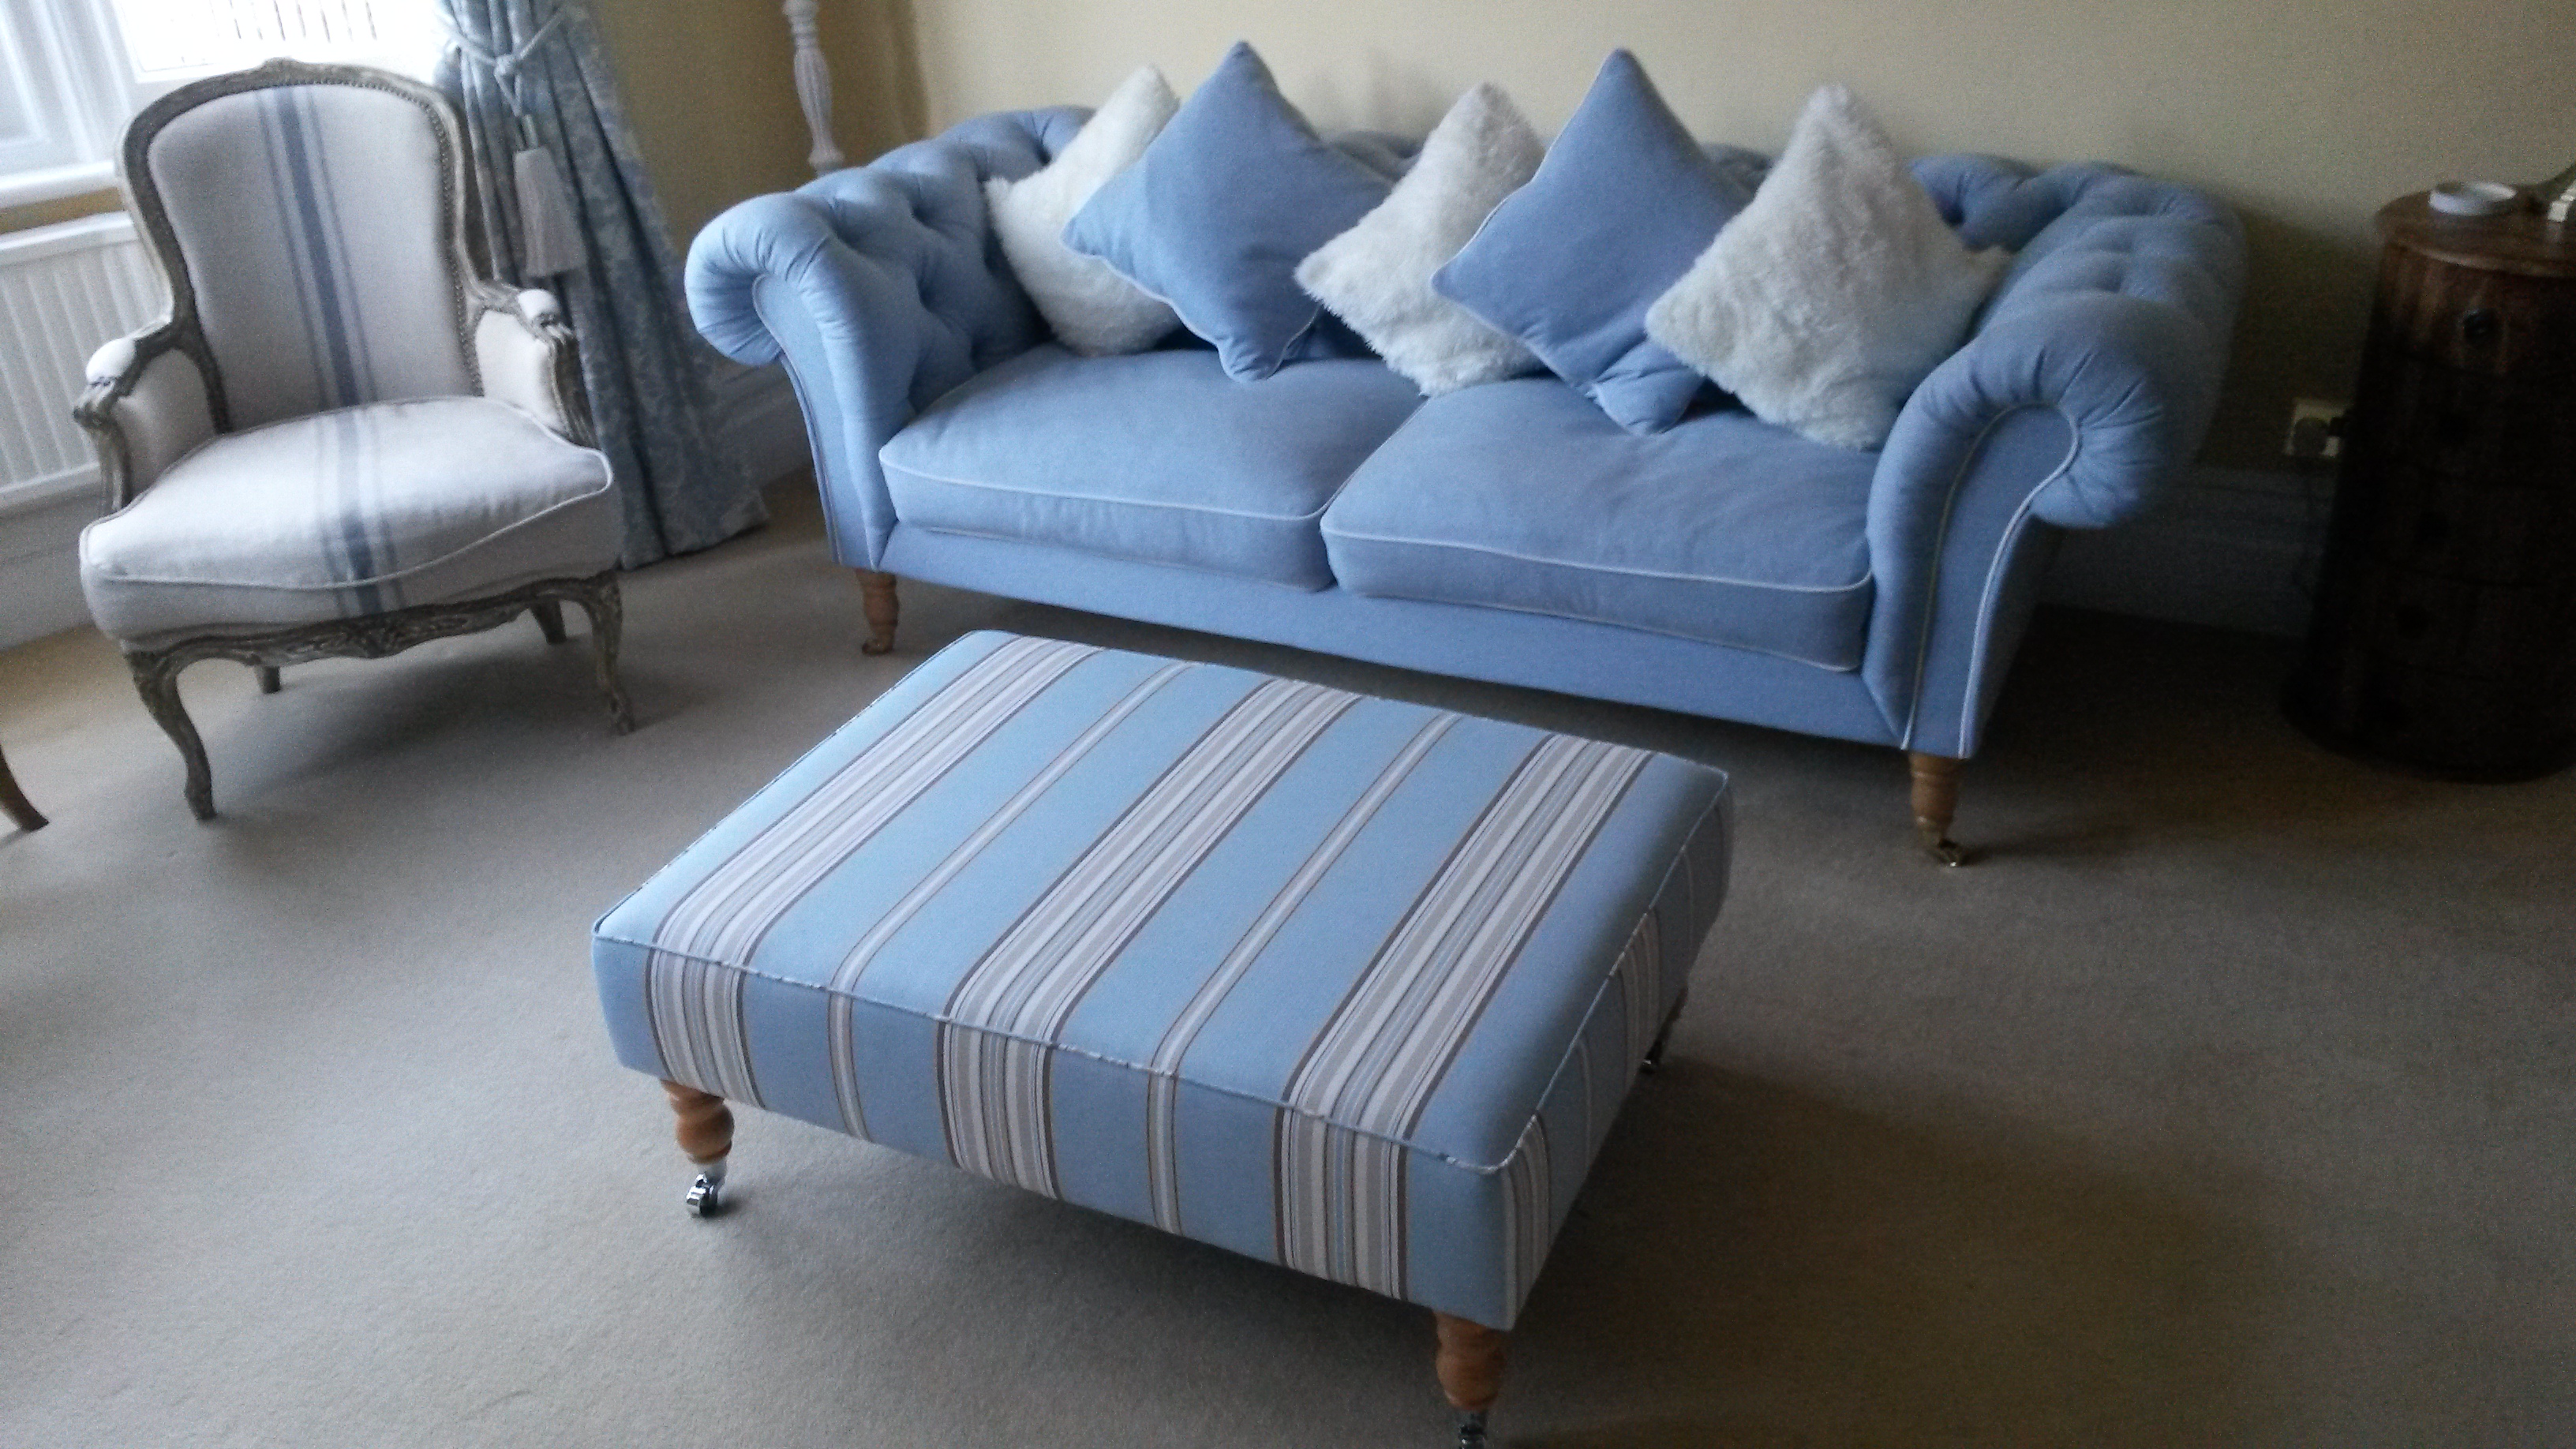 Sofa with cusions and footrest upholstered with light blue fabric